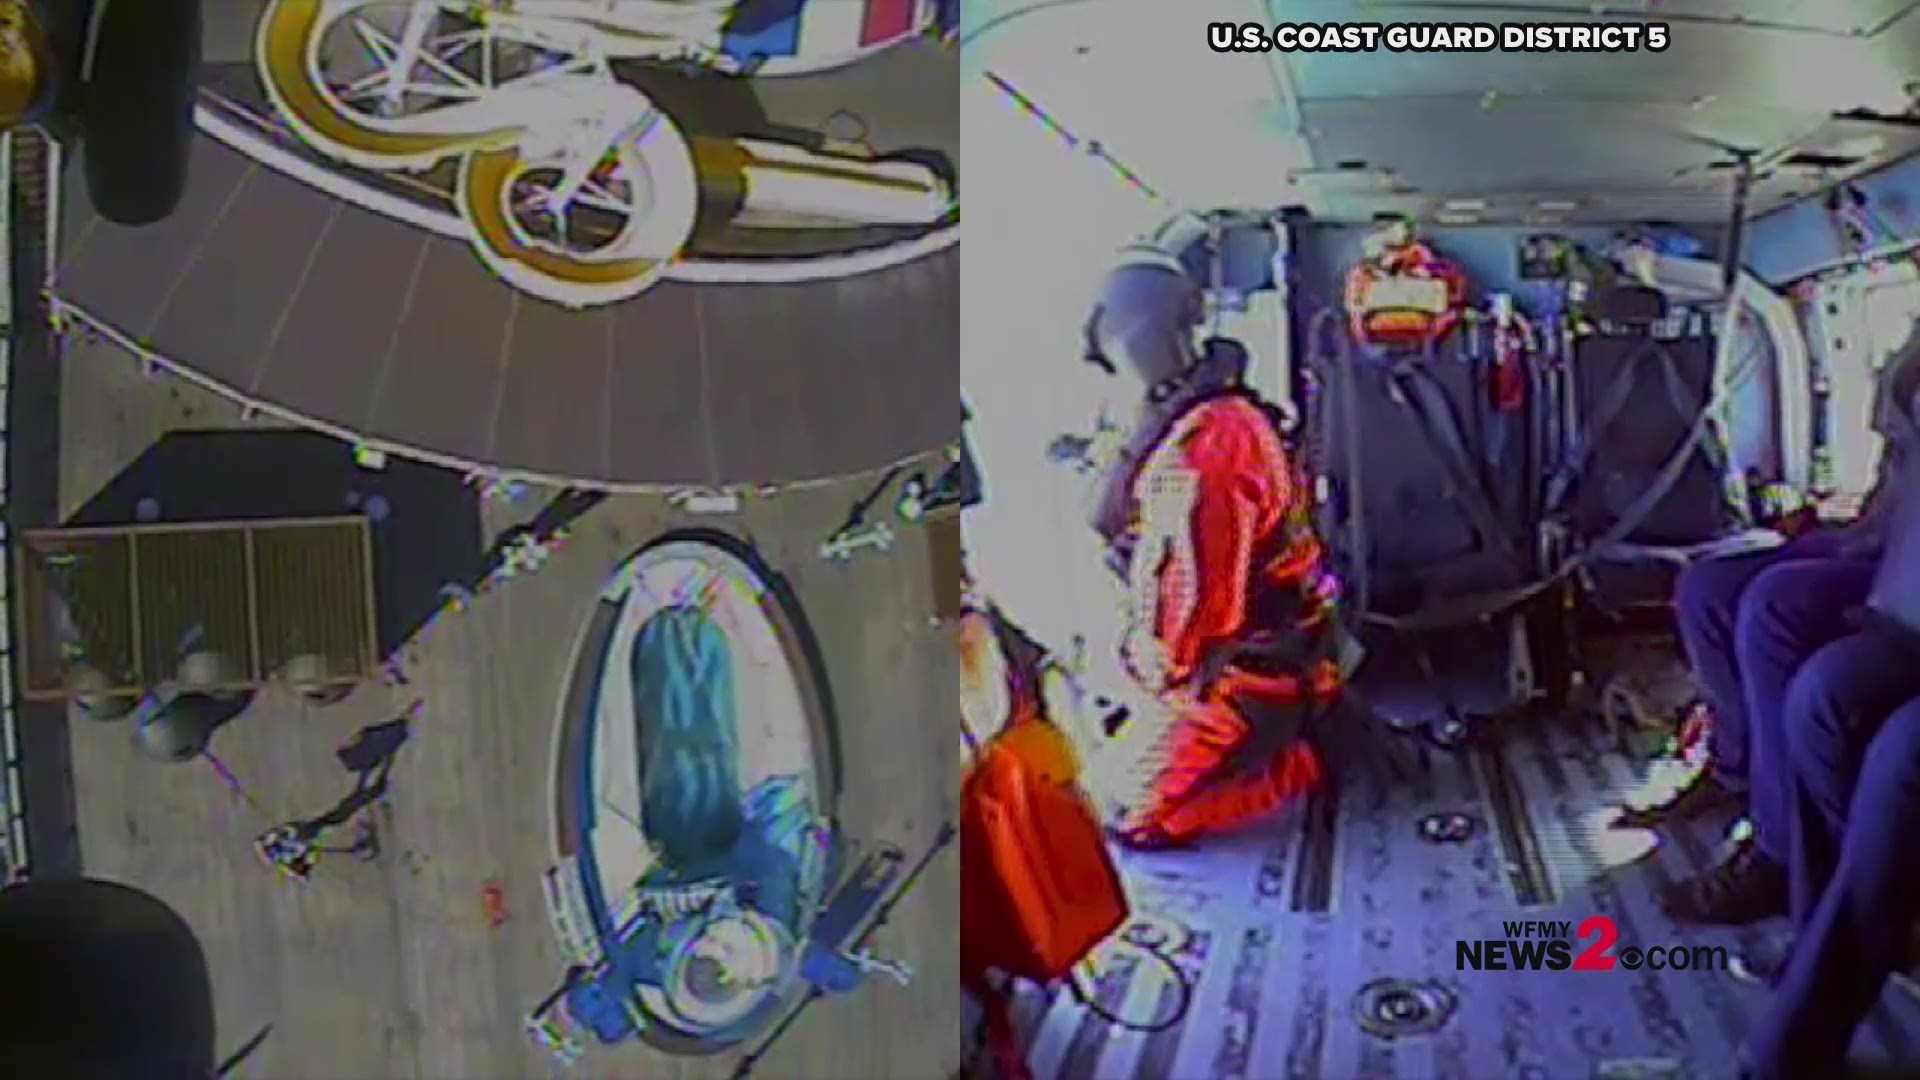 The U.S. Coast Guard medevaced a woman who was having stomach pains from Carnival Pride cruise ship off Cape Hatteras. Video Courtesy: U.S. Coast Guard District 5